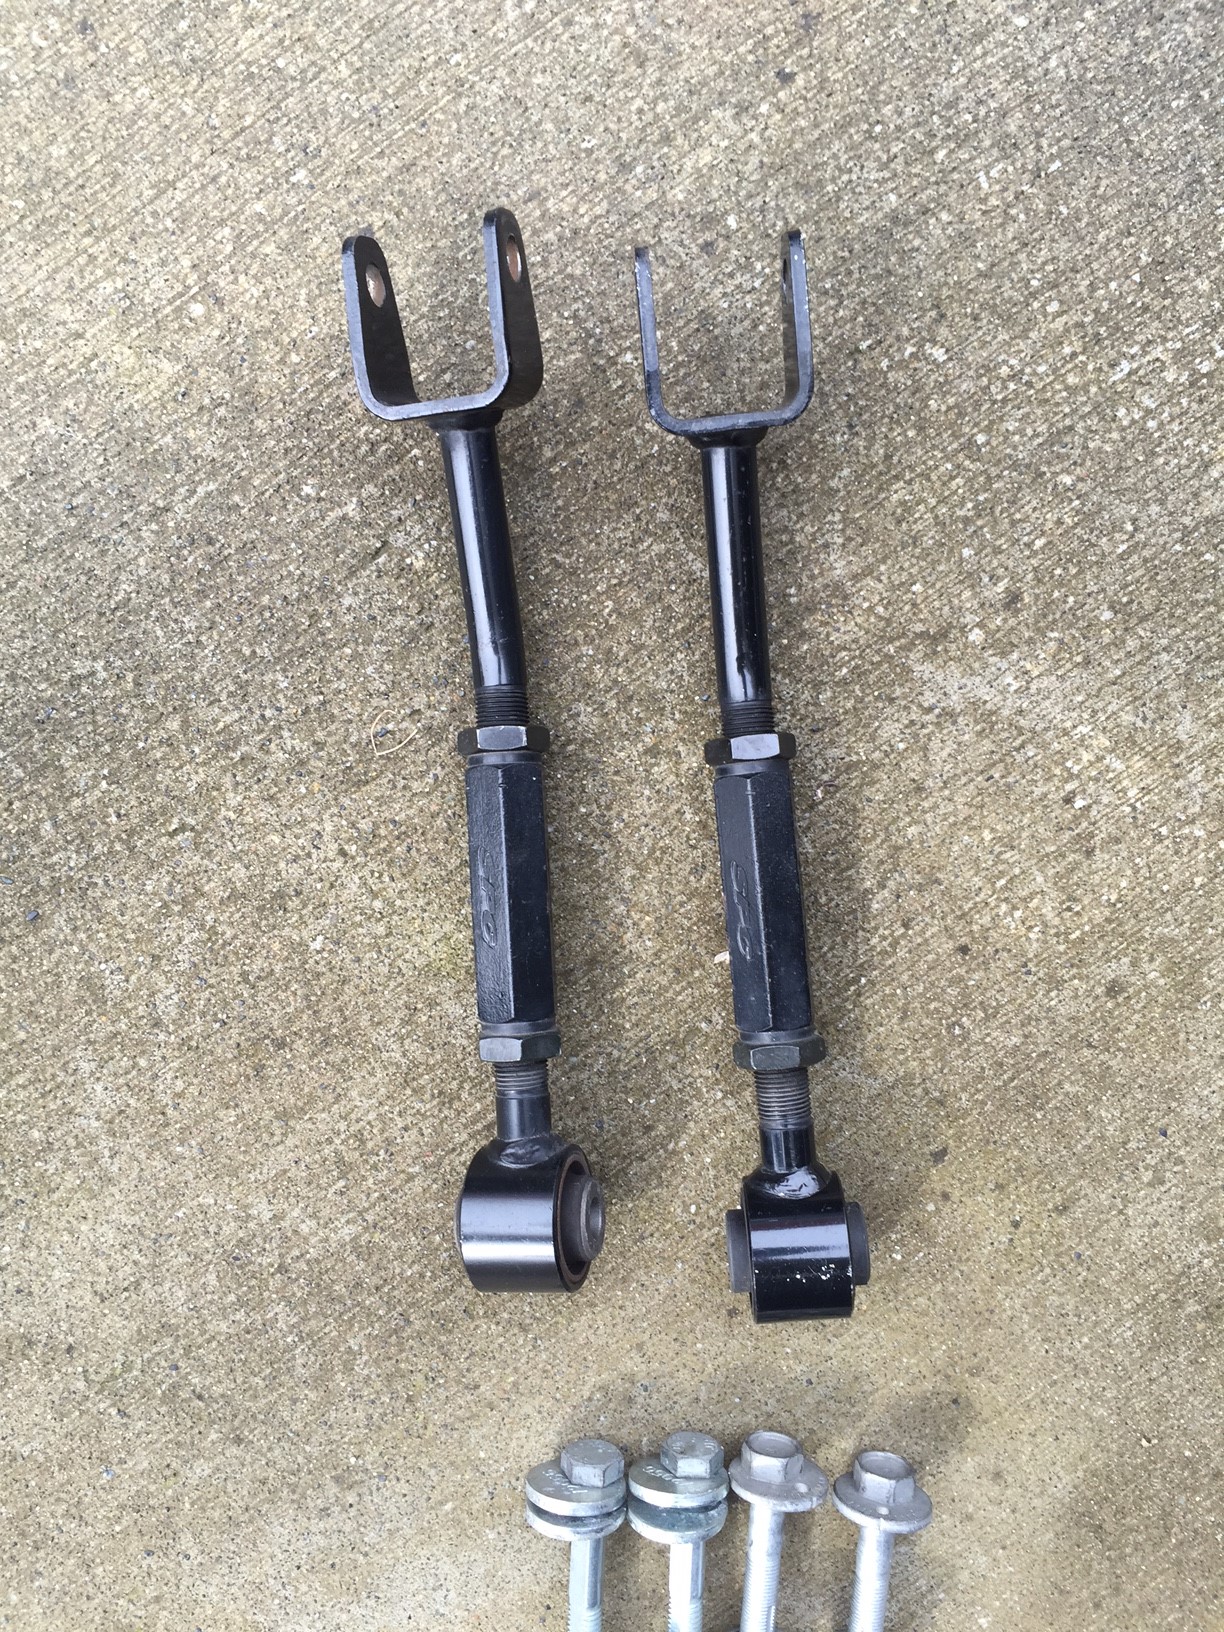 [FS]: SPC Front and Rear Camber Arms with Toe Bolts and Shims - MY350Z ...